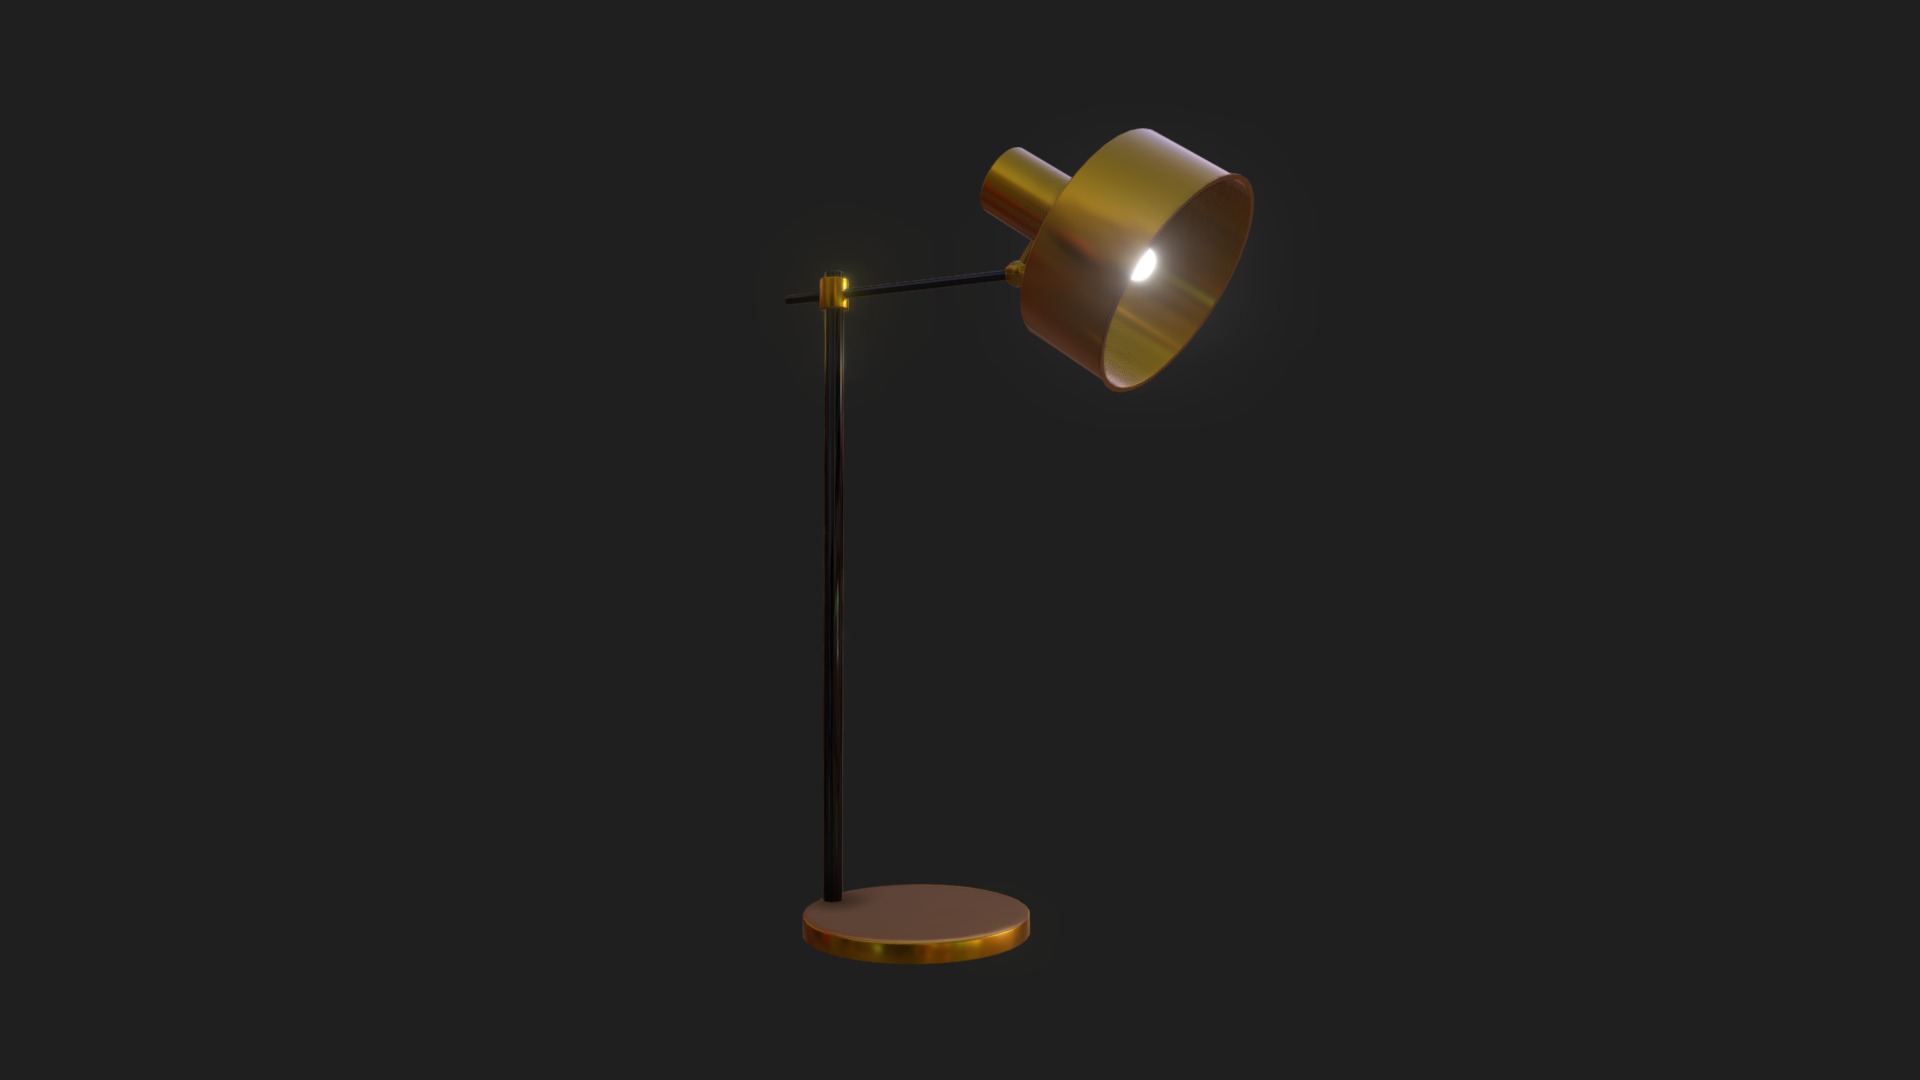 3D model HGP8113-T - This is a 3D model of the HGP8113-T. The 3D model is about a lamp with a shade.